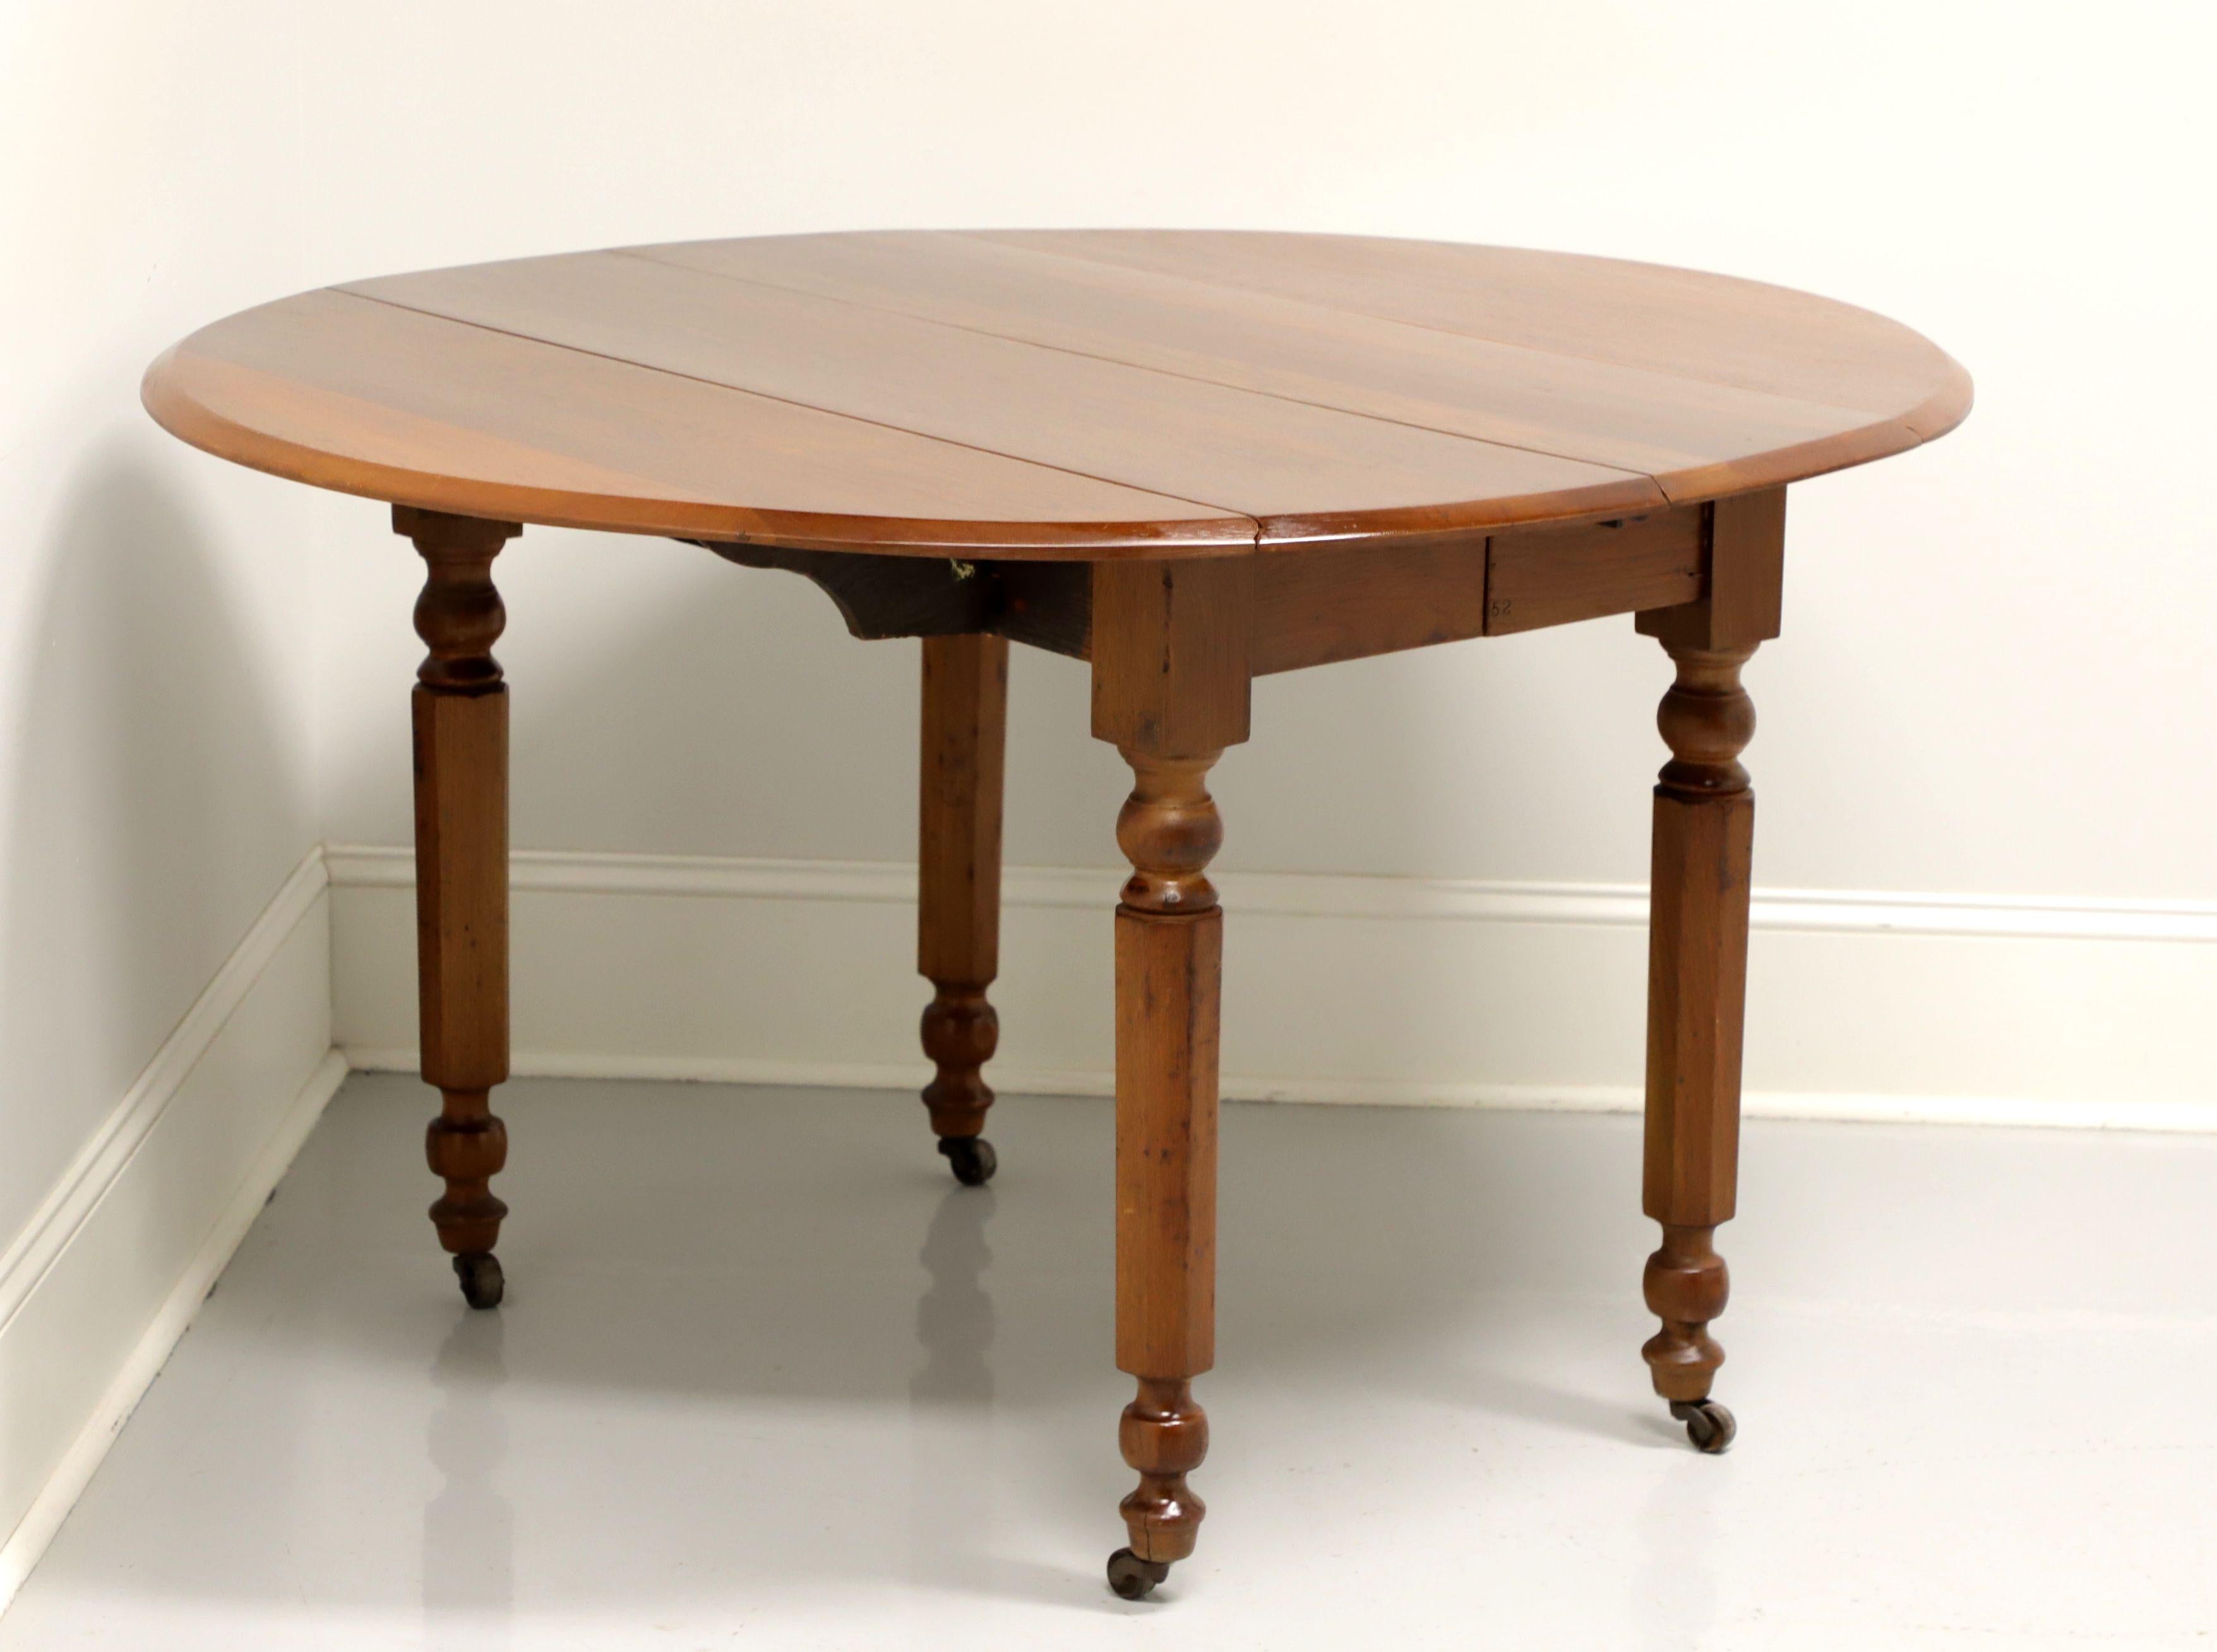 An antique American drop leaf dining table, unbranded. Solid walnut with brass casters. Features a beveled edge, wood fold out arms to support drop leaves, turned and fluted legs with casters. Table does expand on wood expansion sliders to